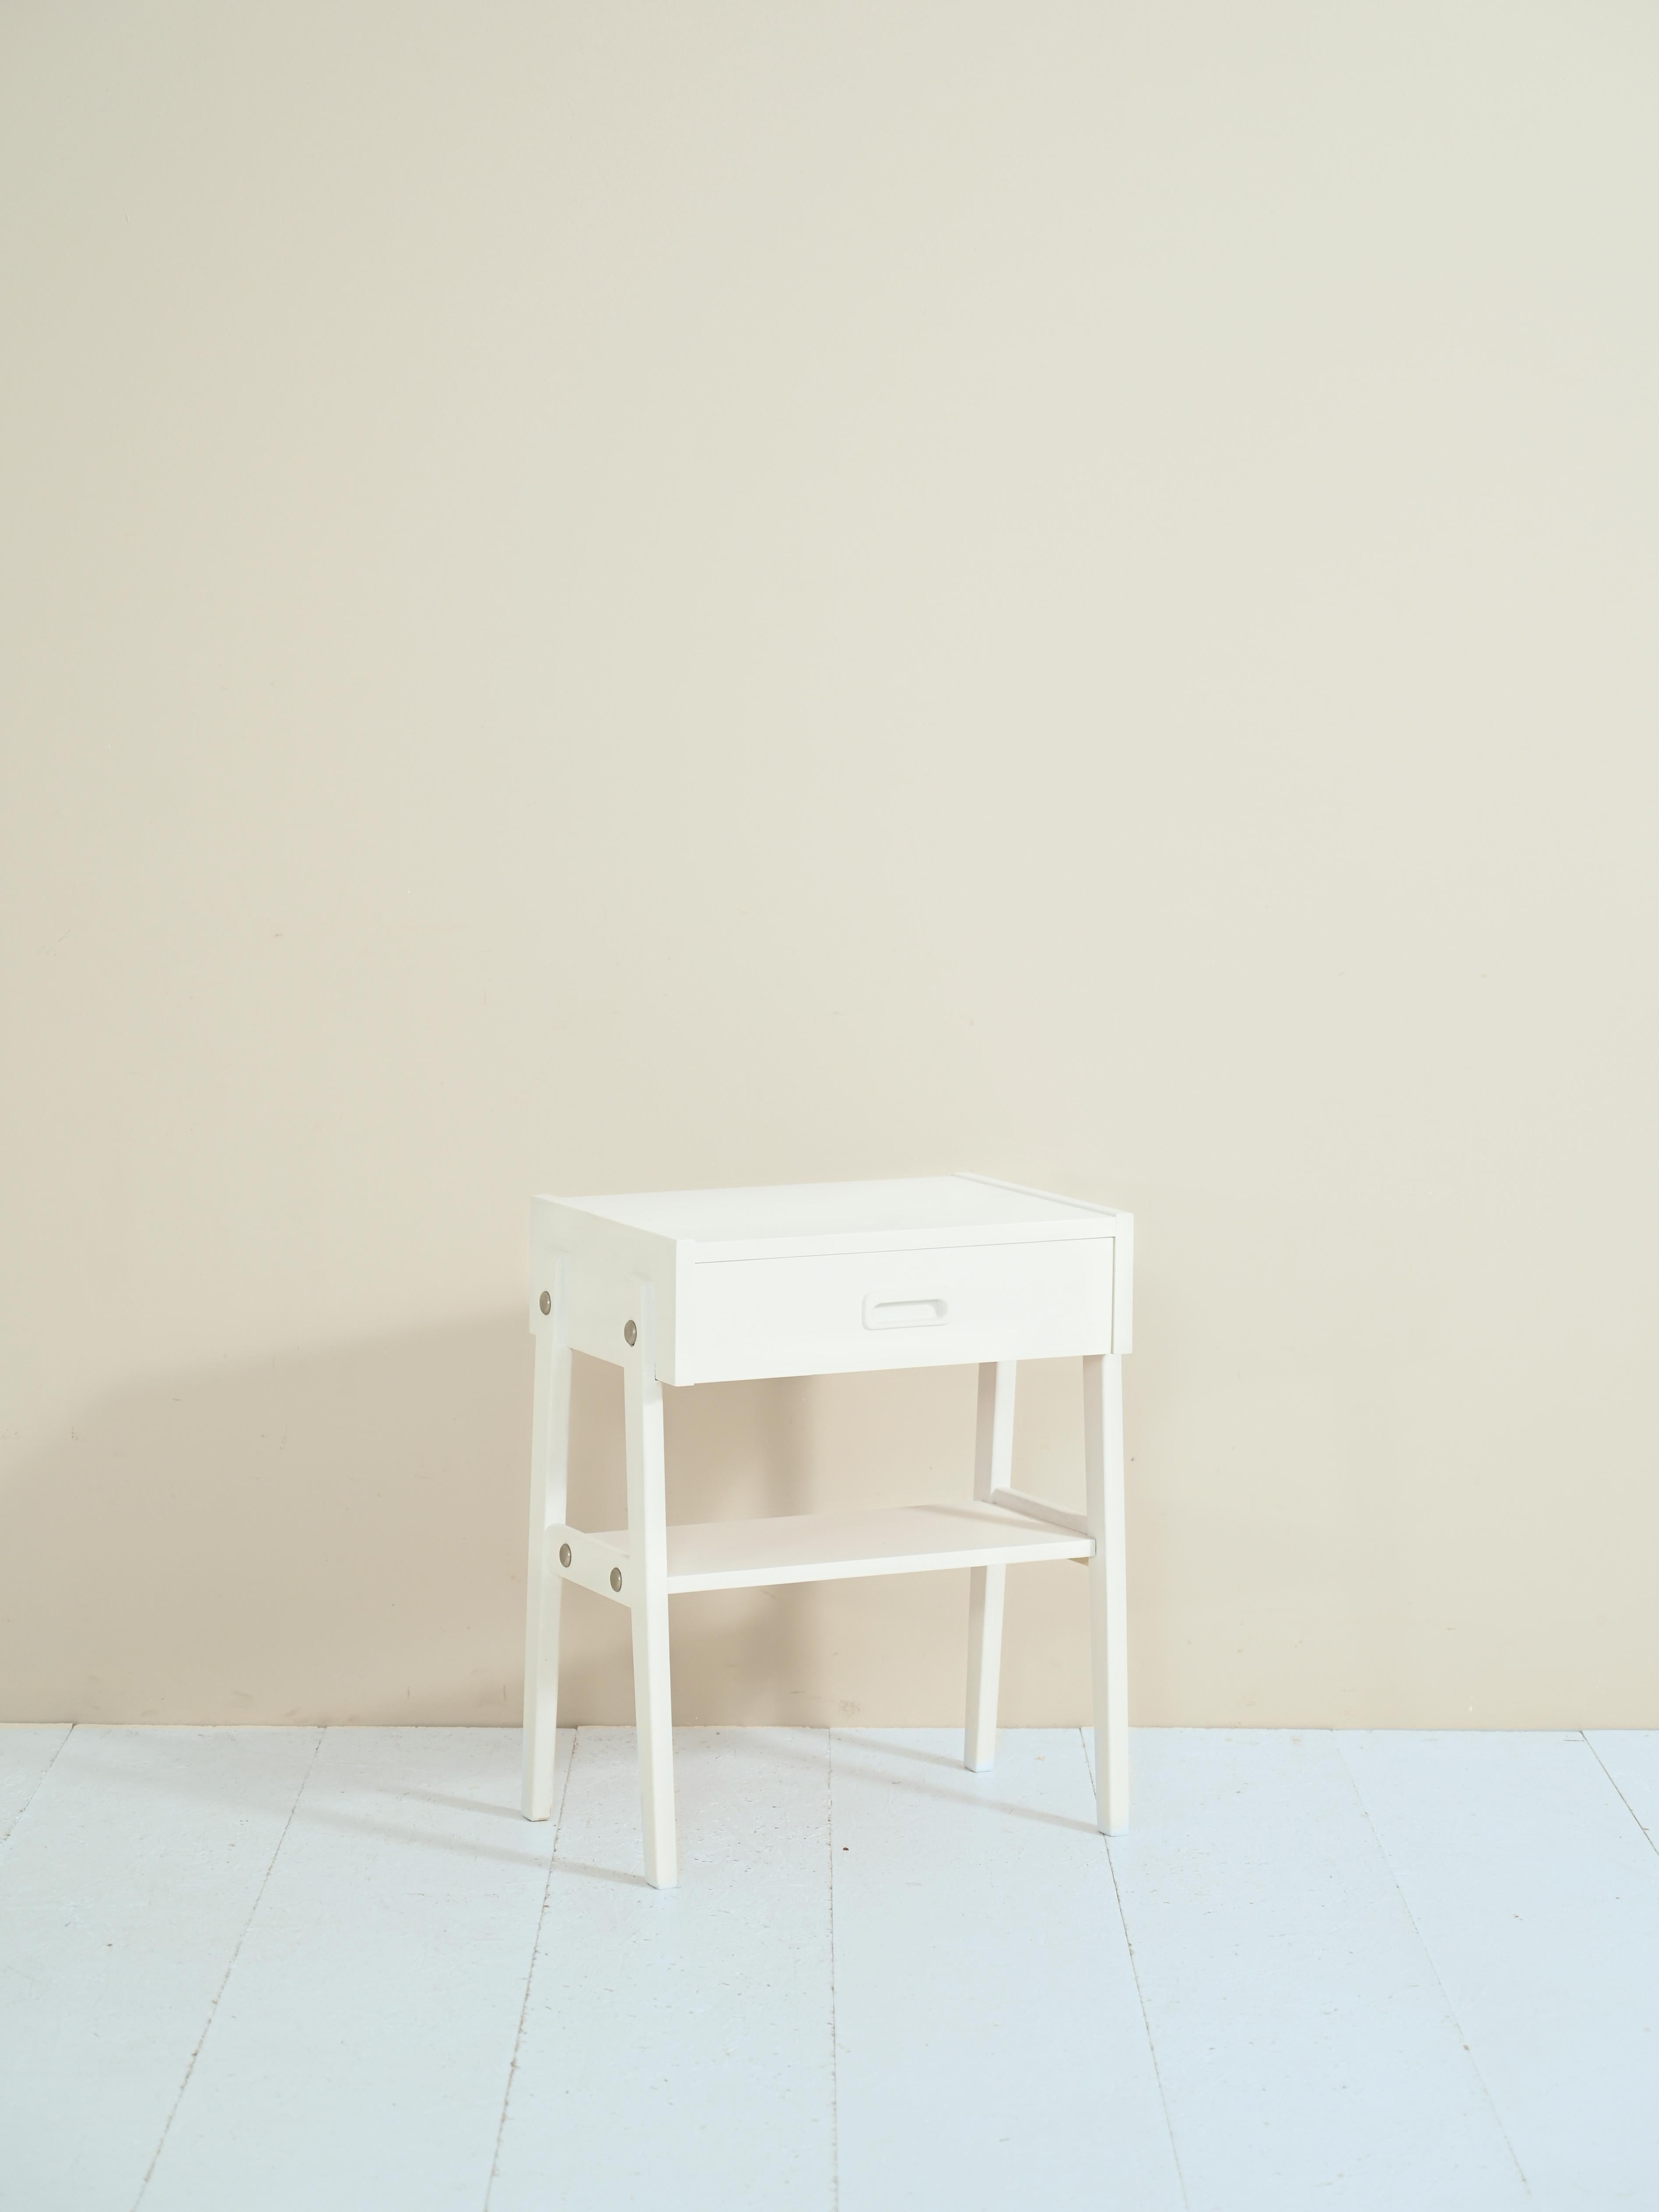 Teak nightstand with drawer.

An original mid-century Nordic design piece of furniture. The wooden structure is painted white. There is also a shelf, convenient for use as a magazine rack.

A piece of furniture that can be used both in its classic